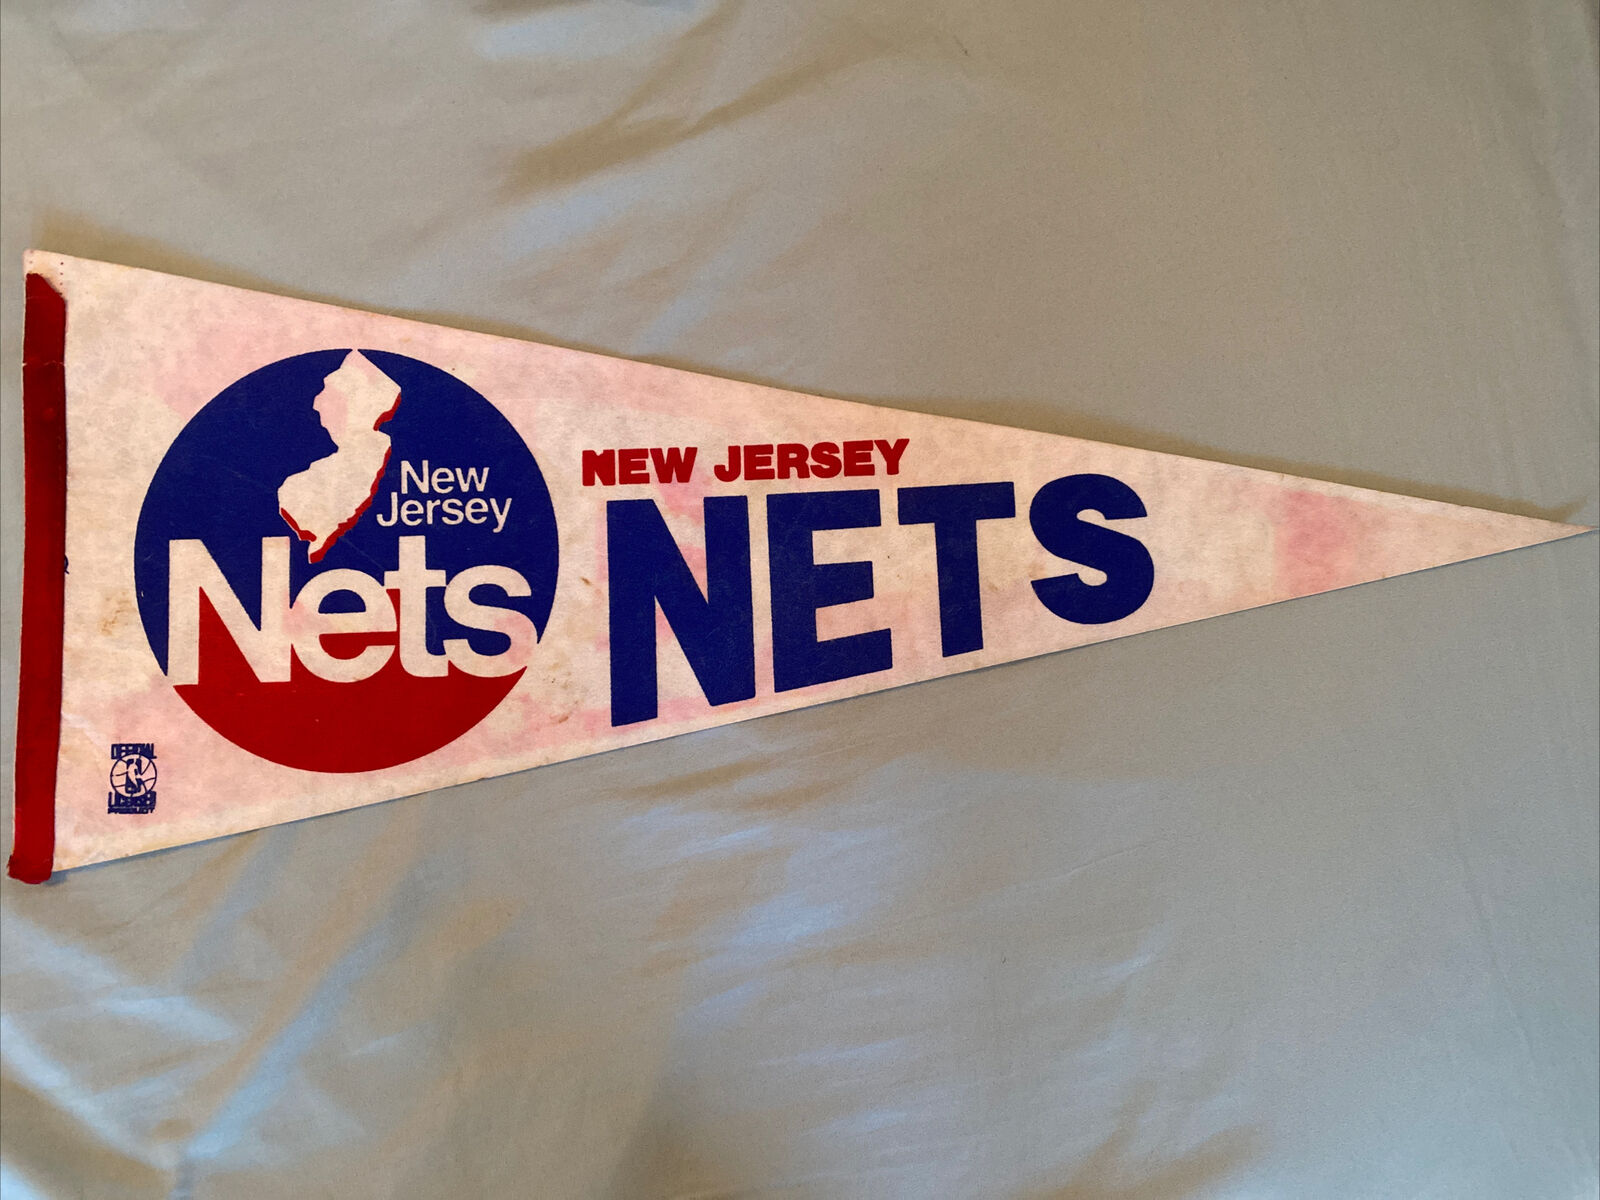 Authentic Vintage New Jersey Nets Nba Licensed Felt Pennant 30 Inch New Flag